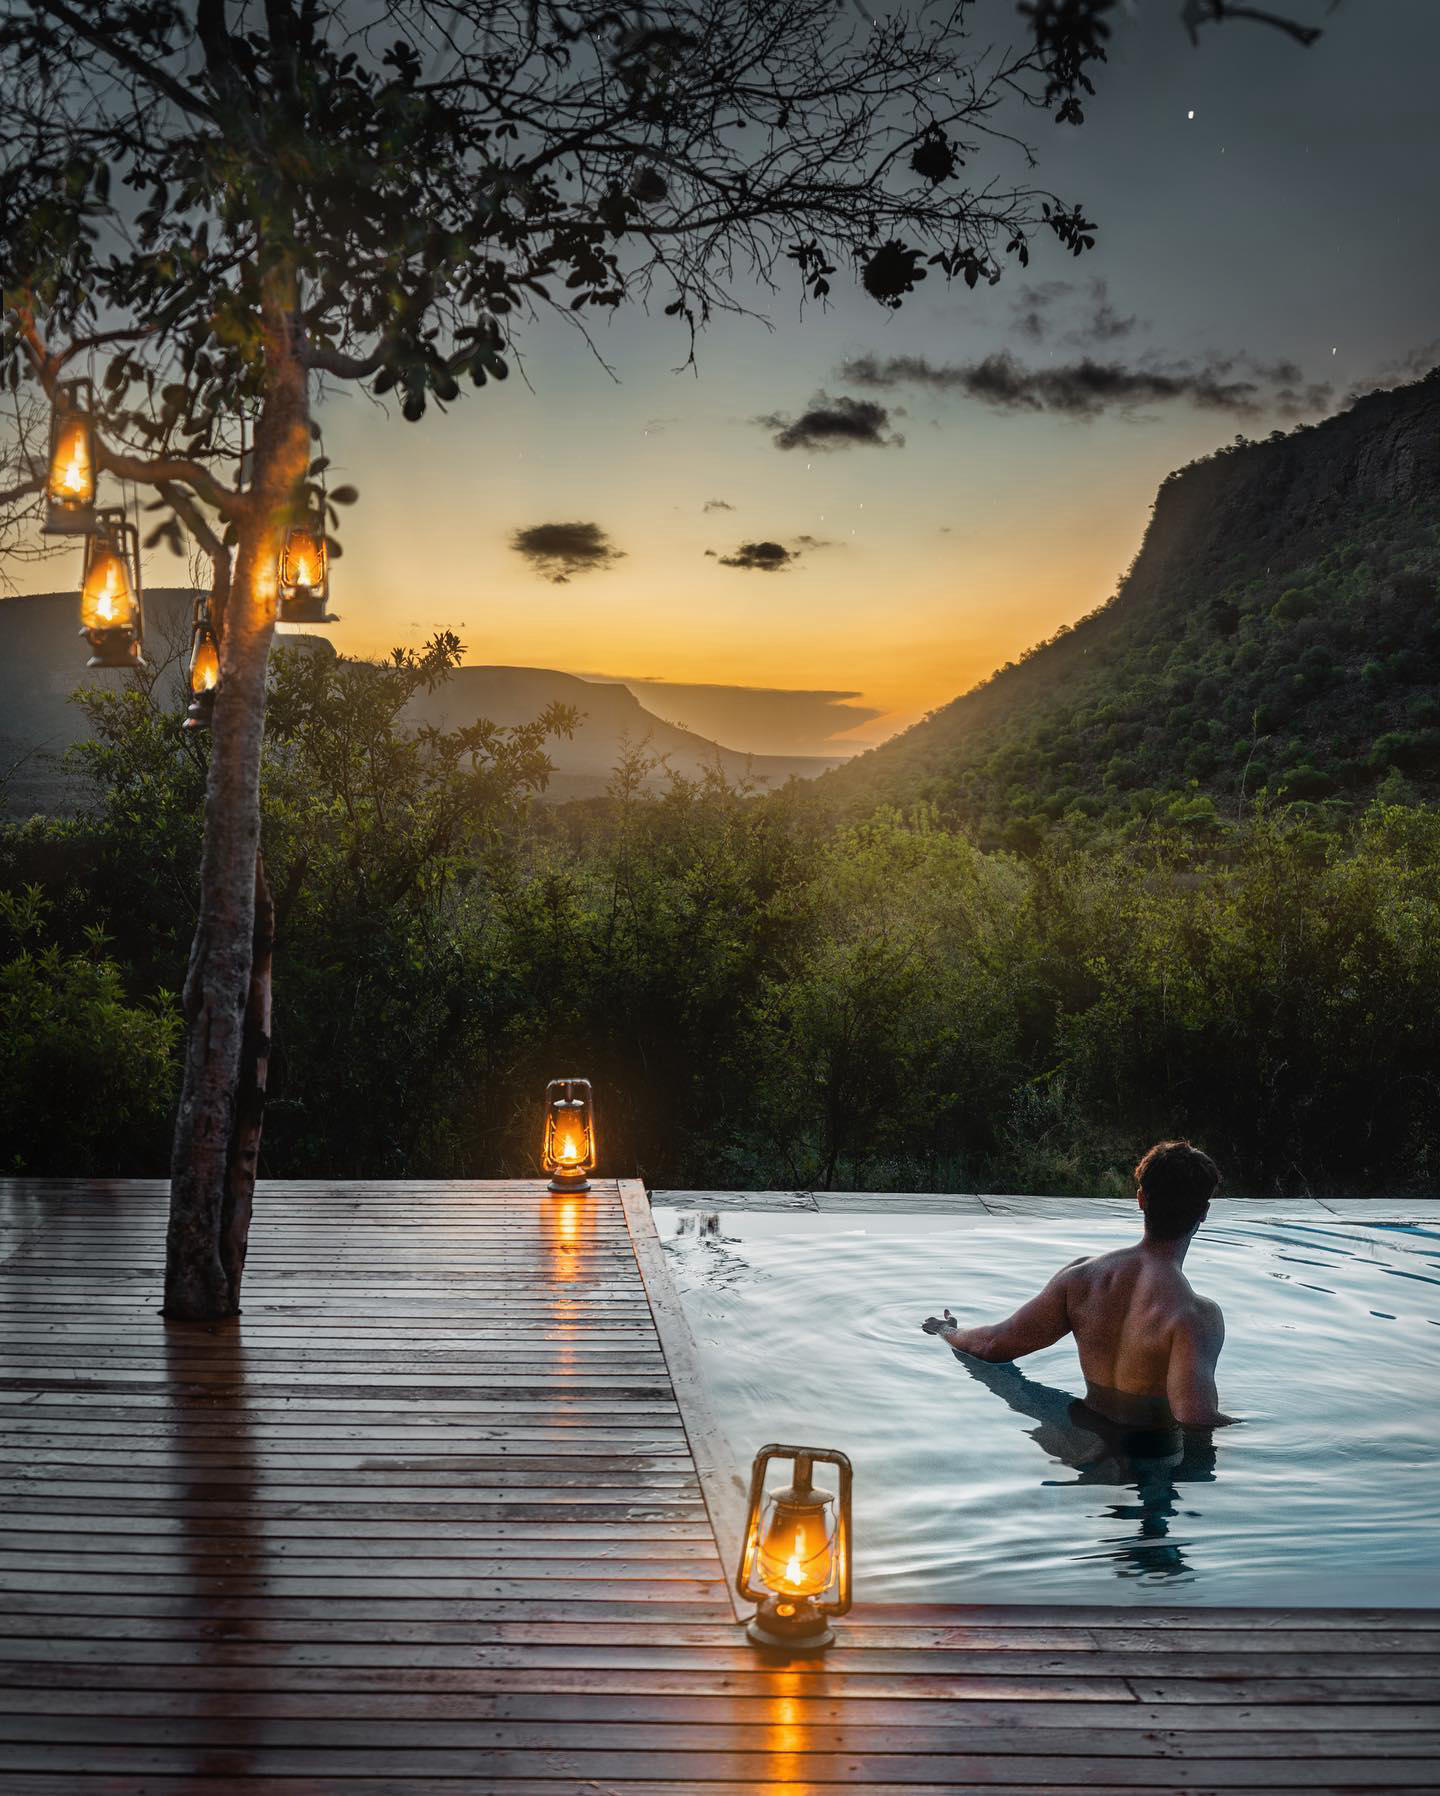 Dr.Ali Alsulaiman - The magnificent view from the infinity pool at Mountain Lodge #maratabaluxurylod